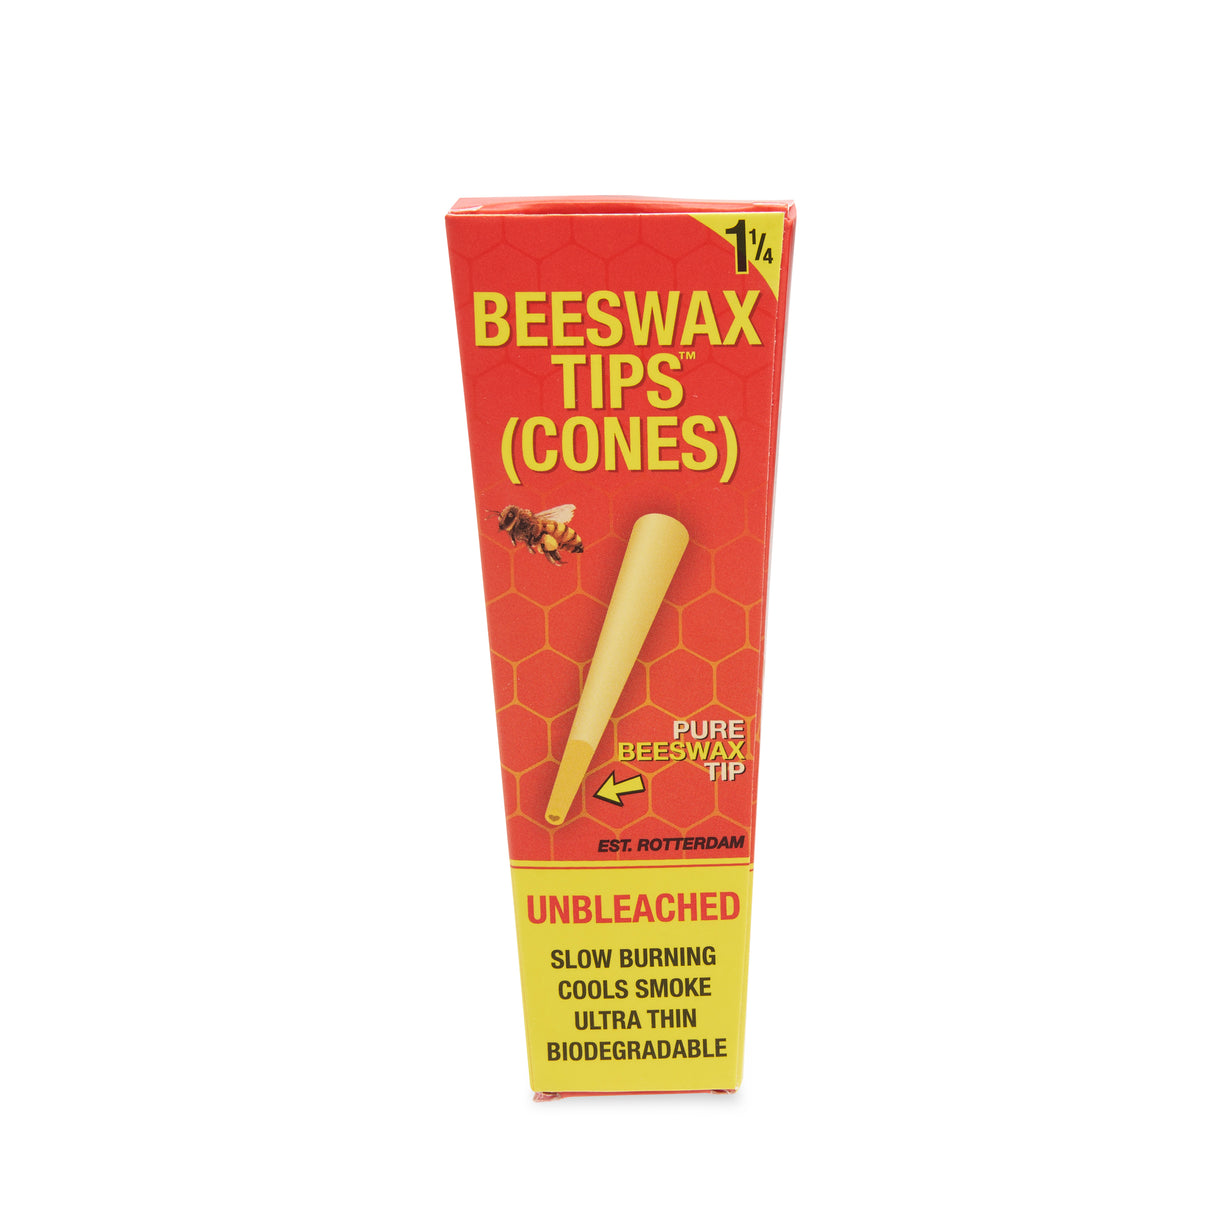 Bloomer 1 1/4 Cones with Beeswax Tips - 21ct Display